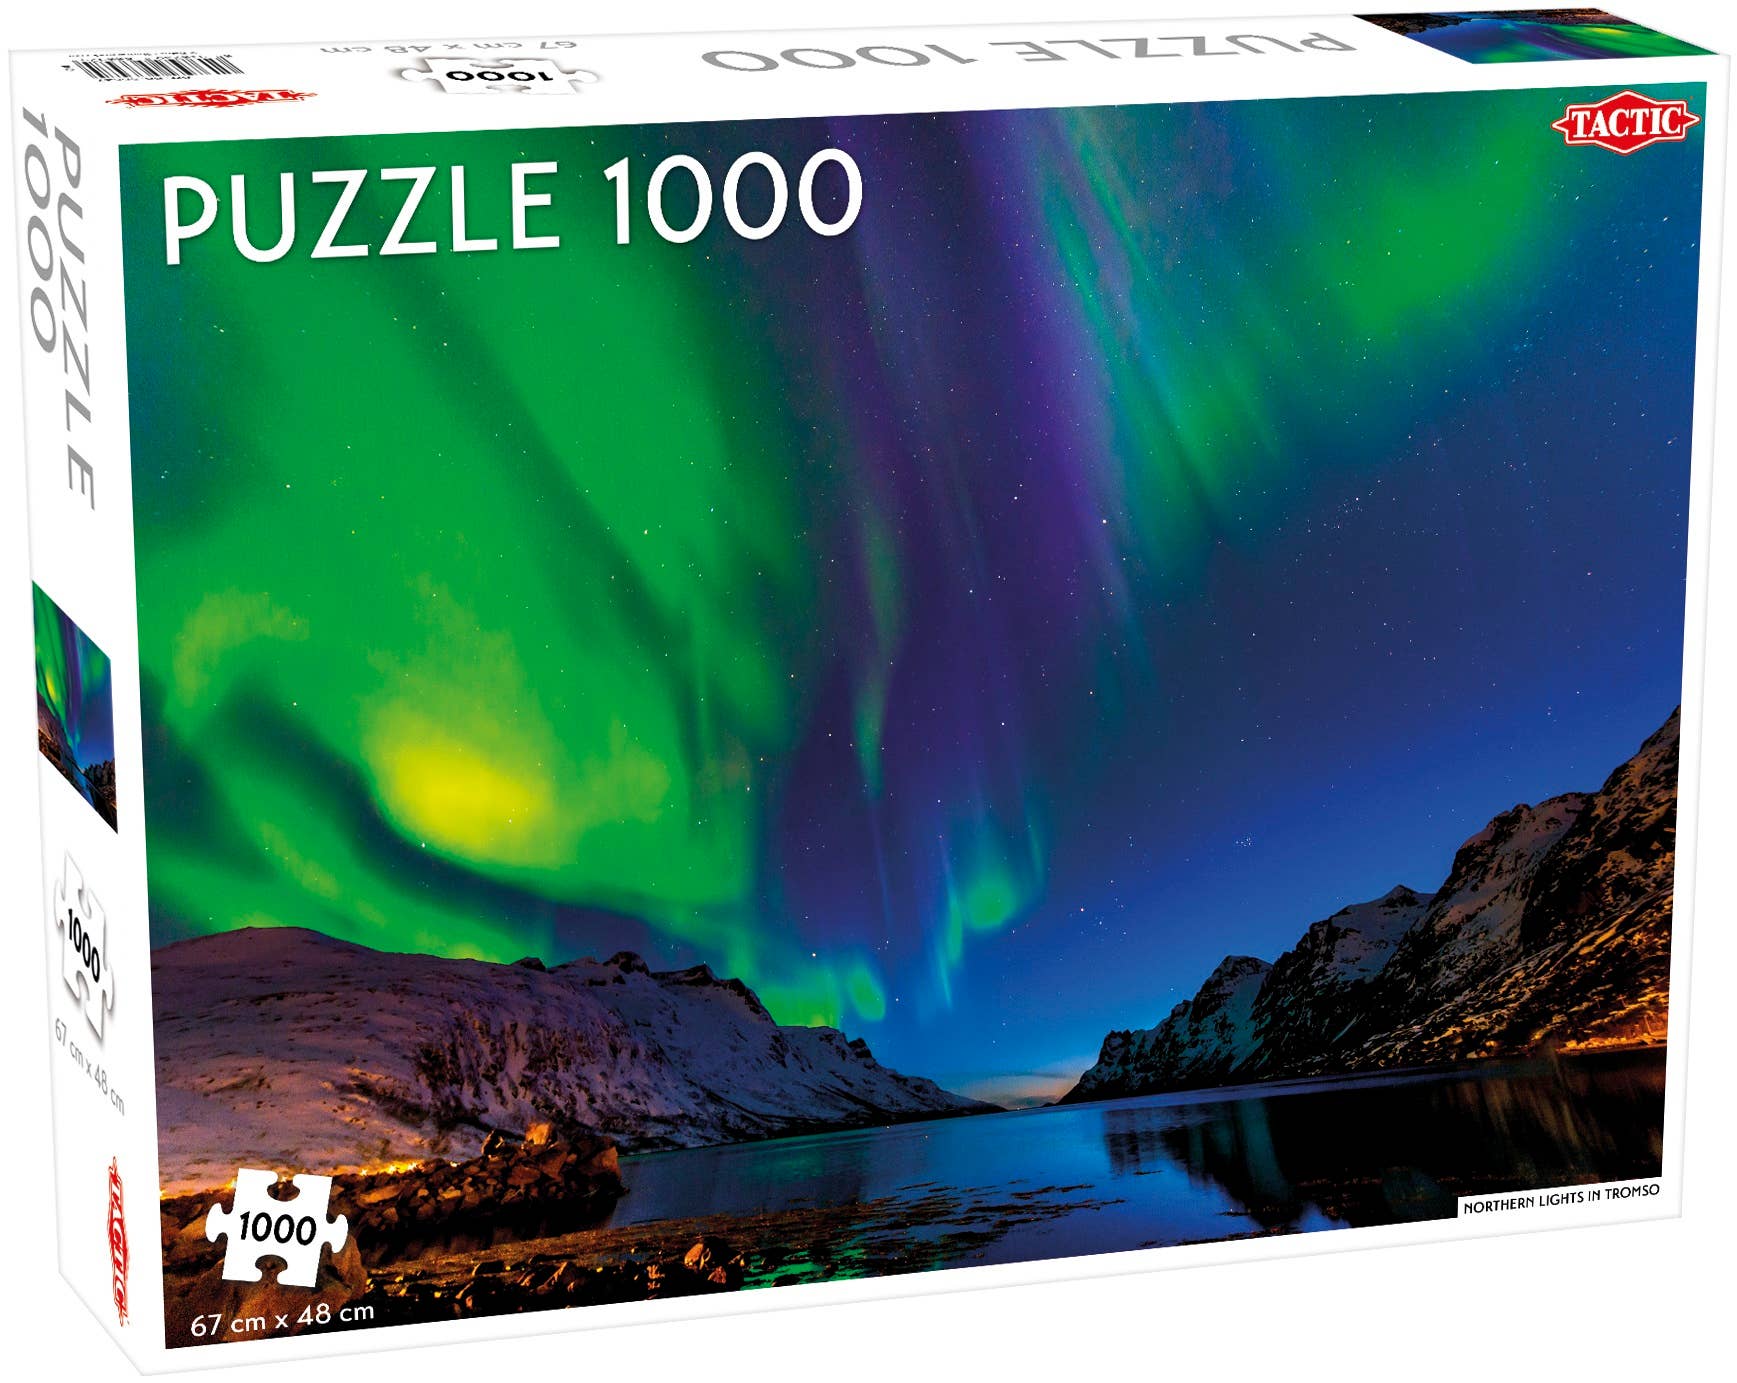 Puzzle: Northern Lights in Tromso Norway (1000 Pieces)